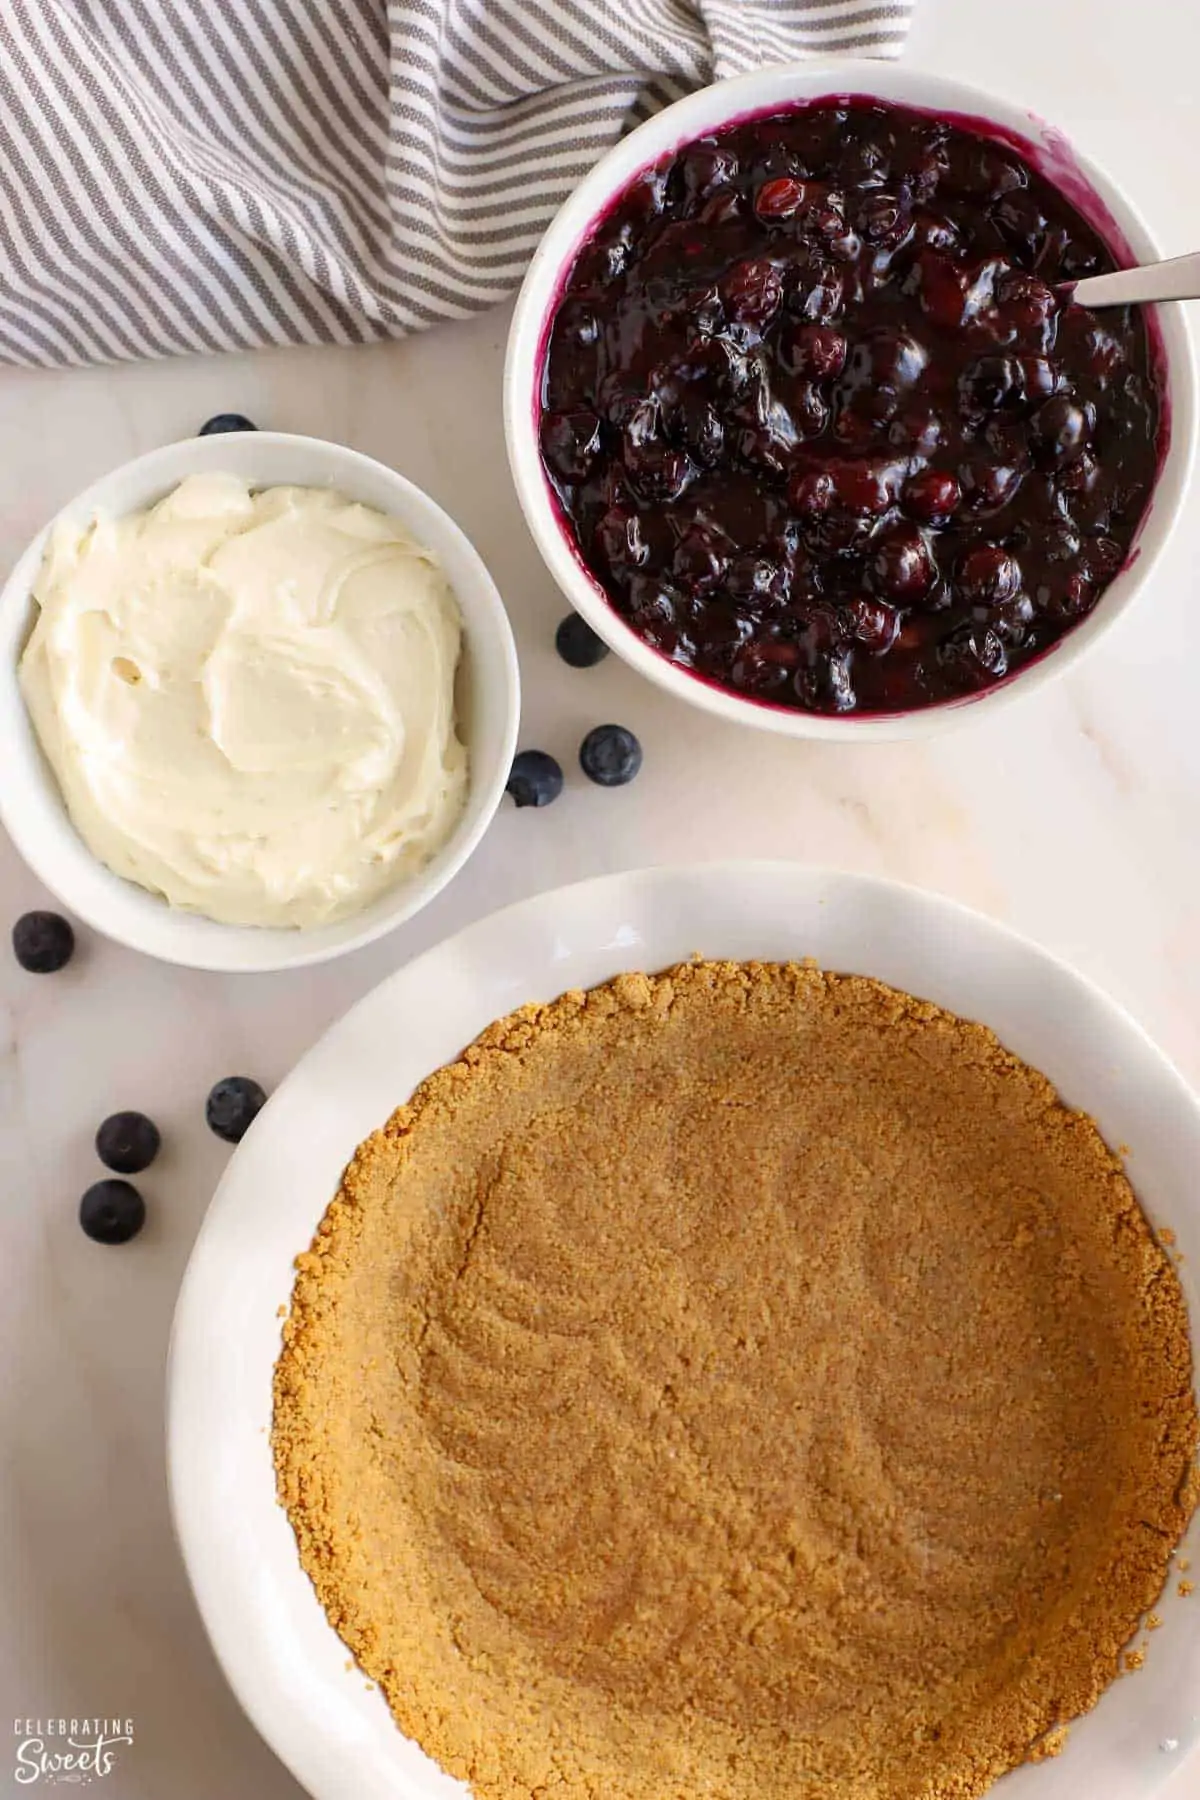 Graham cracker crust in a white pie plate, blueberry pie filling in a white bowl, and cream cheese in a white bowl.